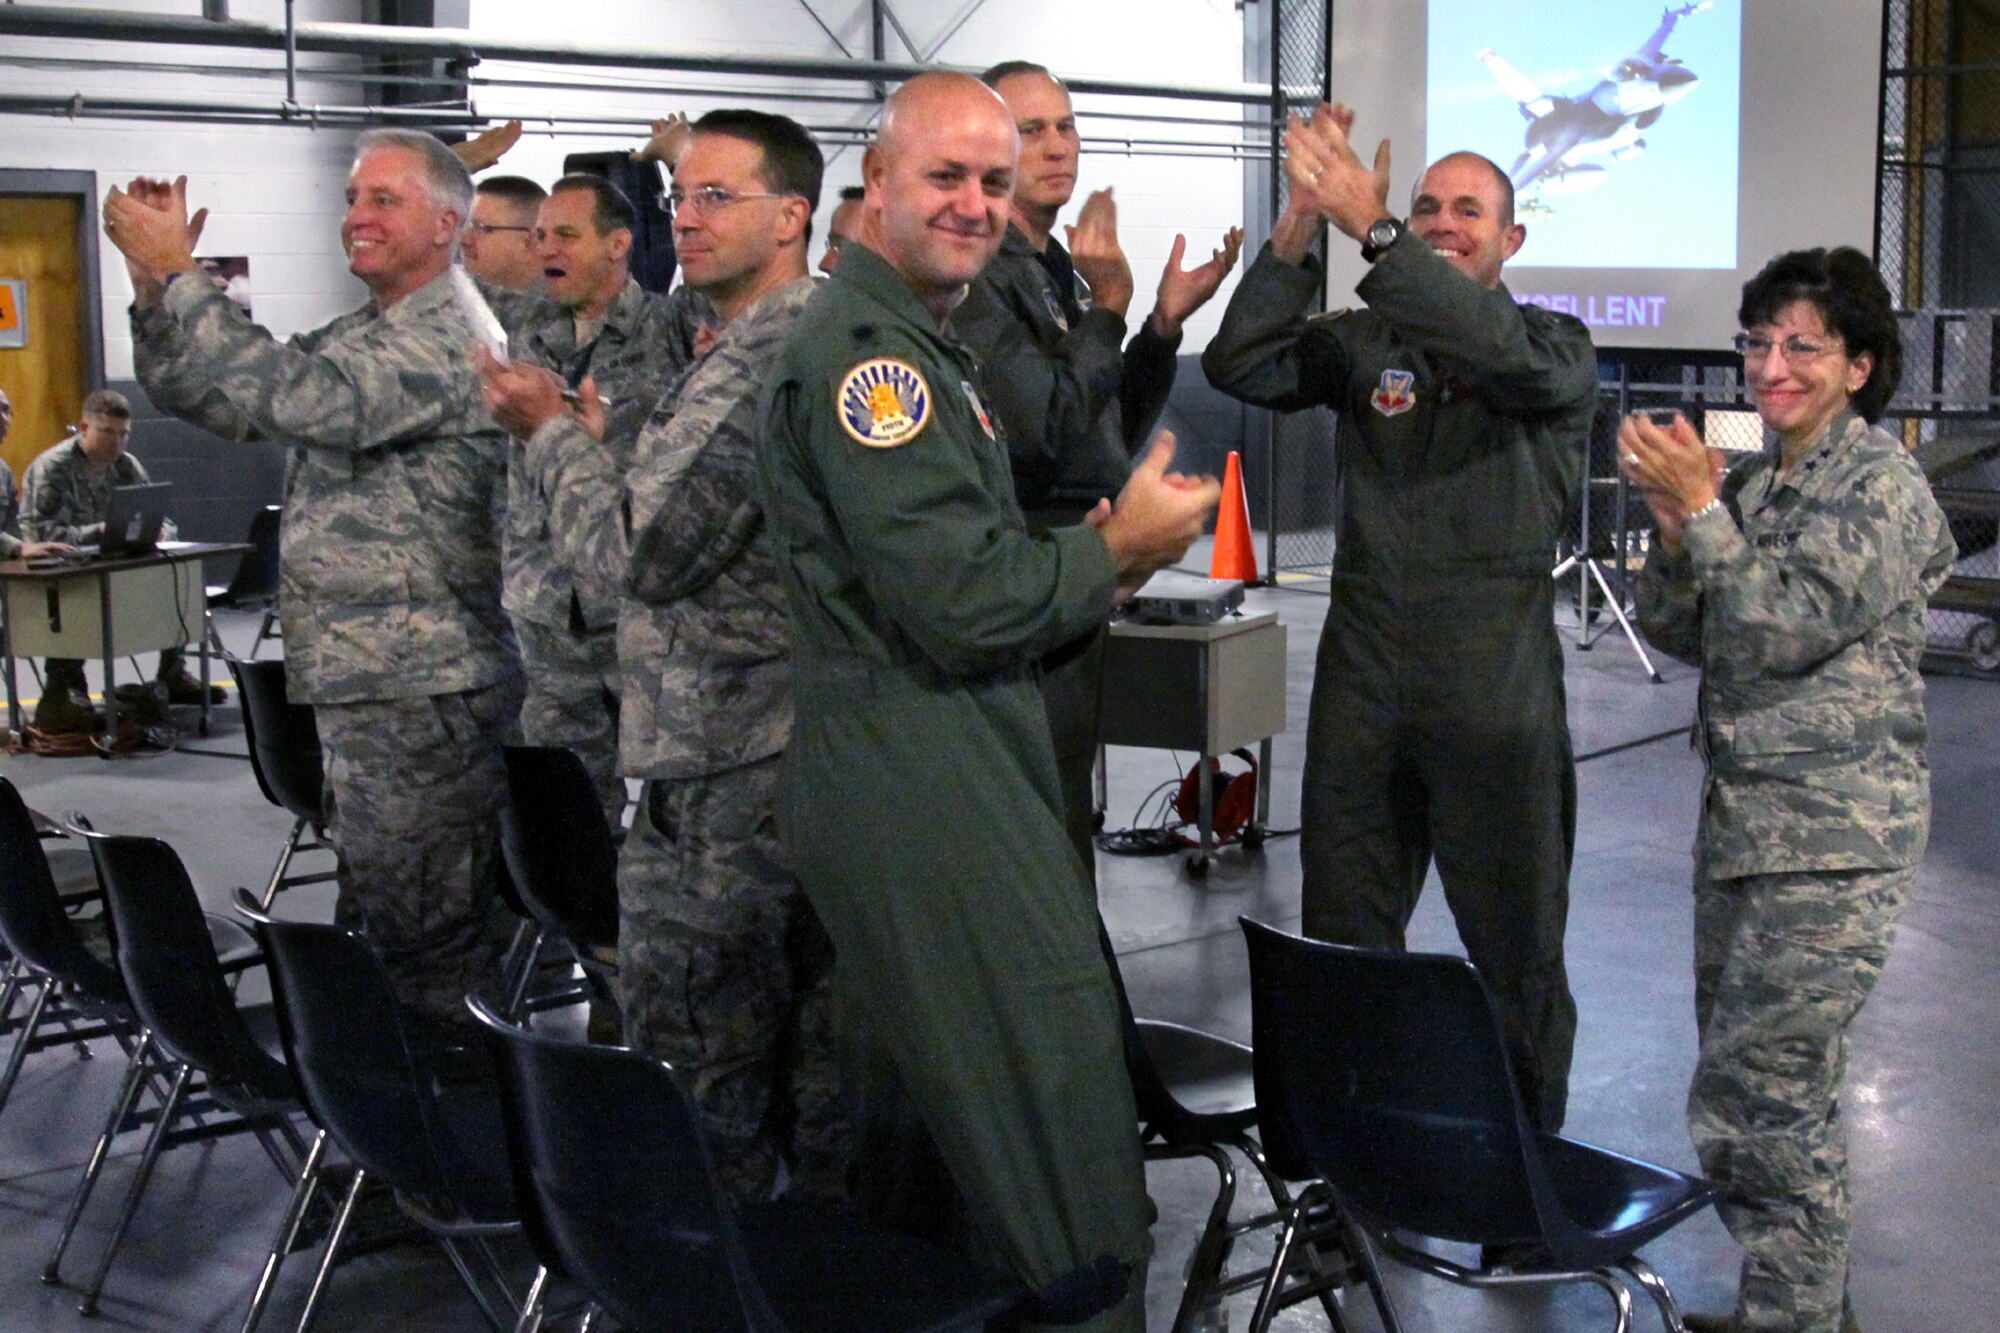 A picture of Airmen from the 177th Fighter Wing applauding.